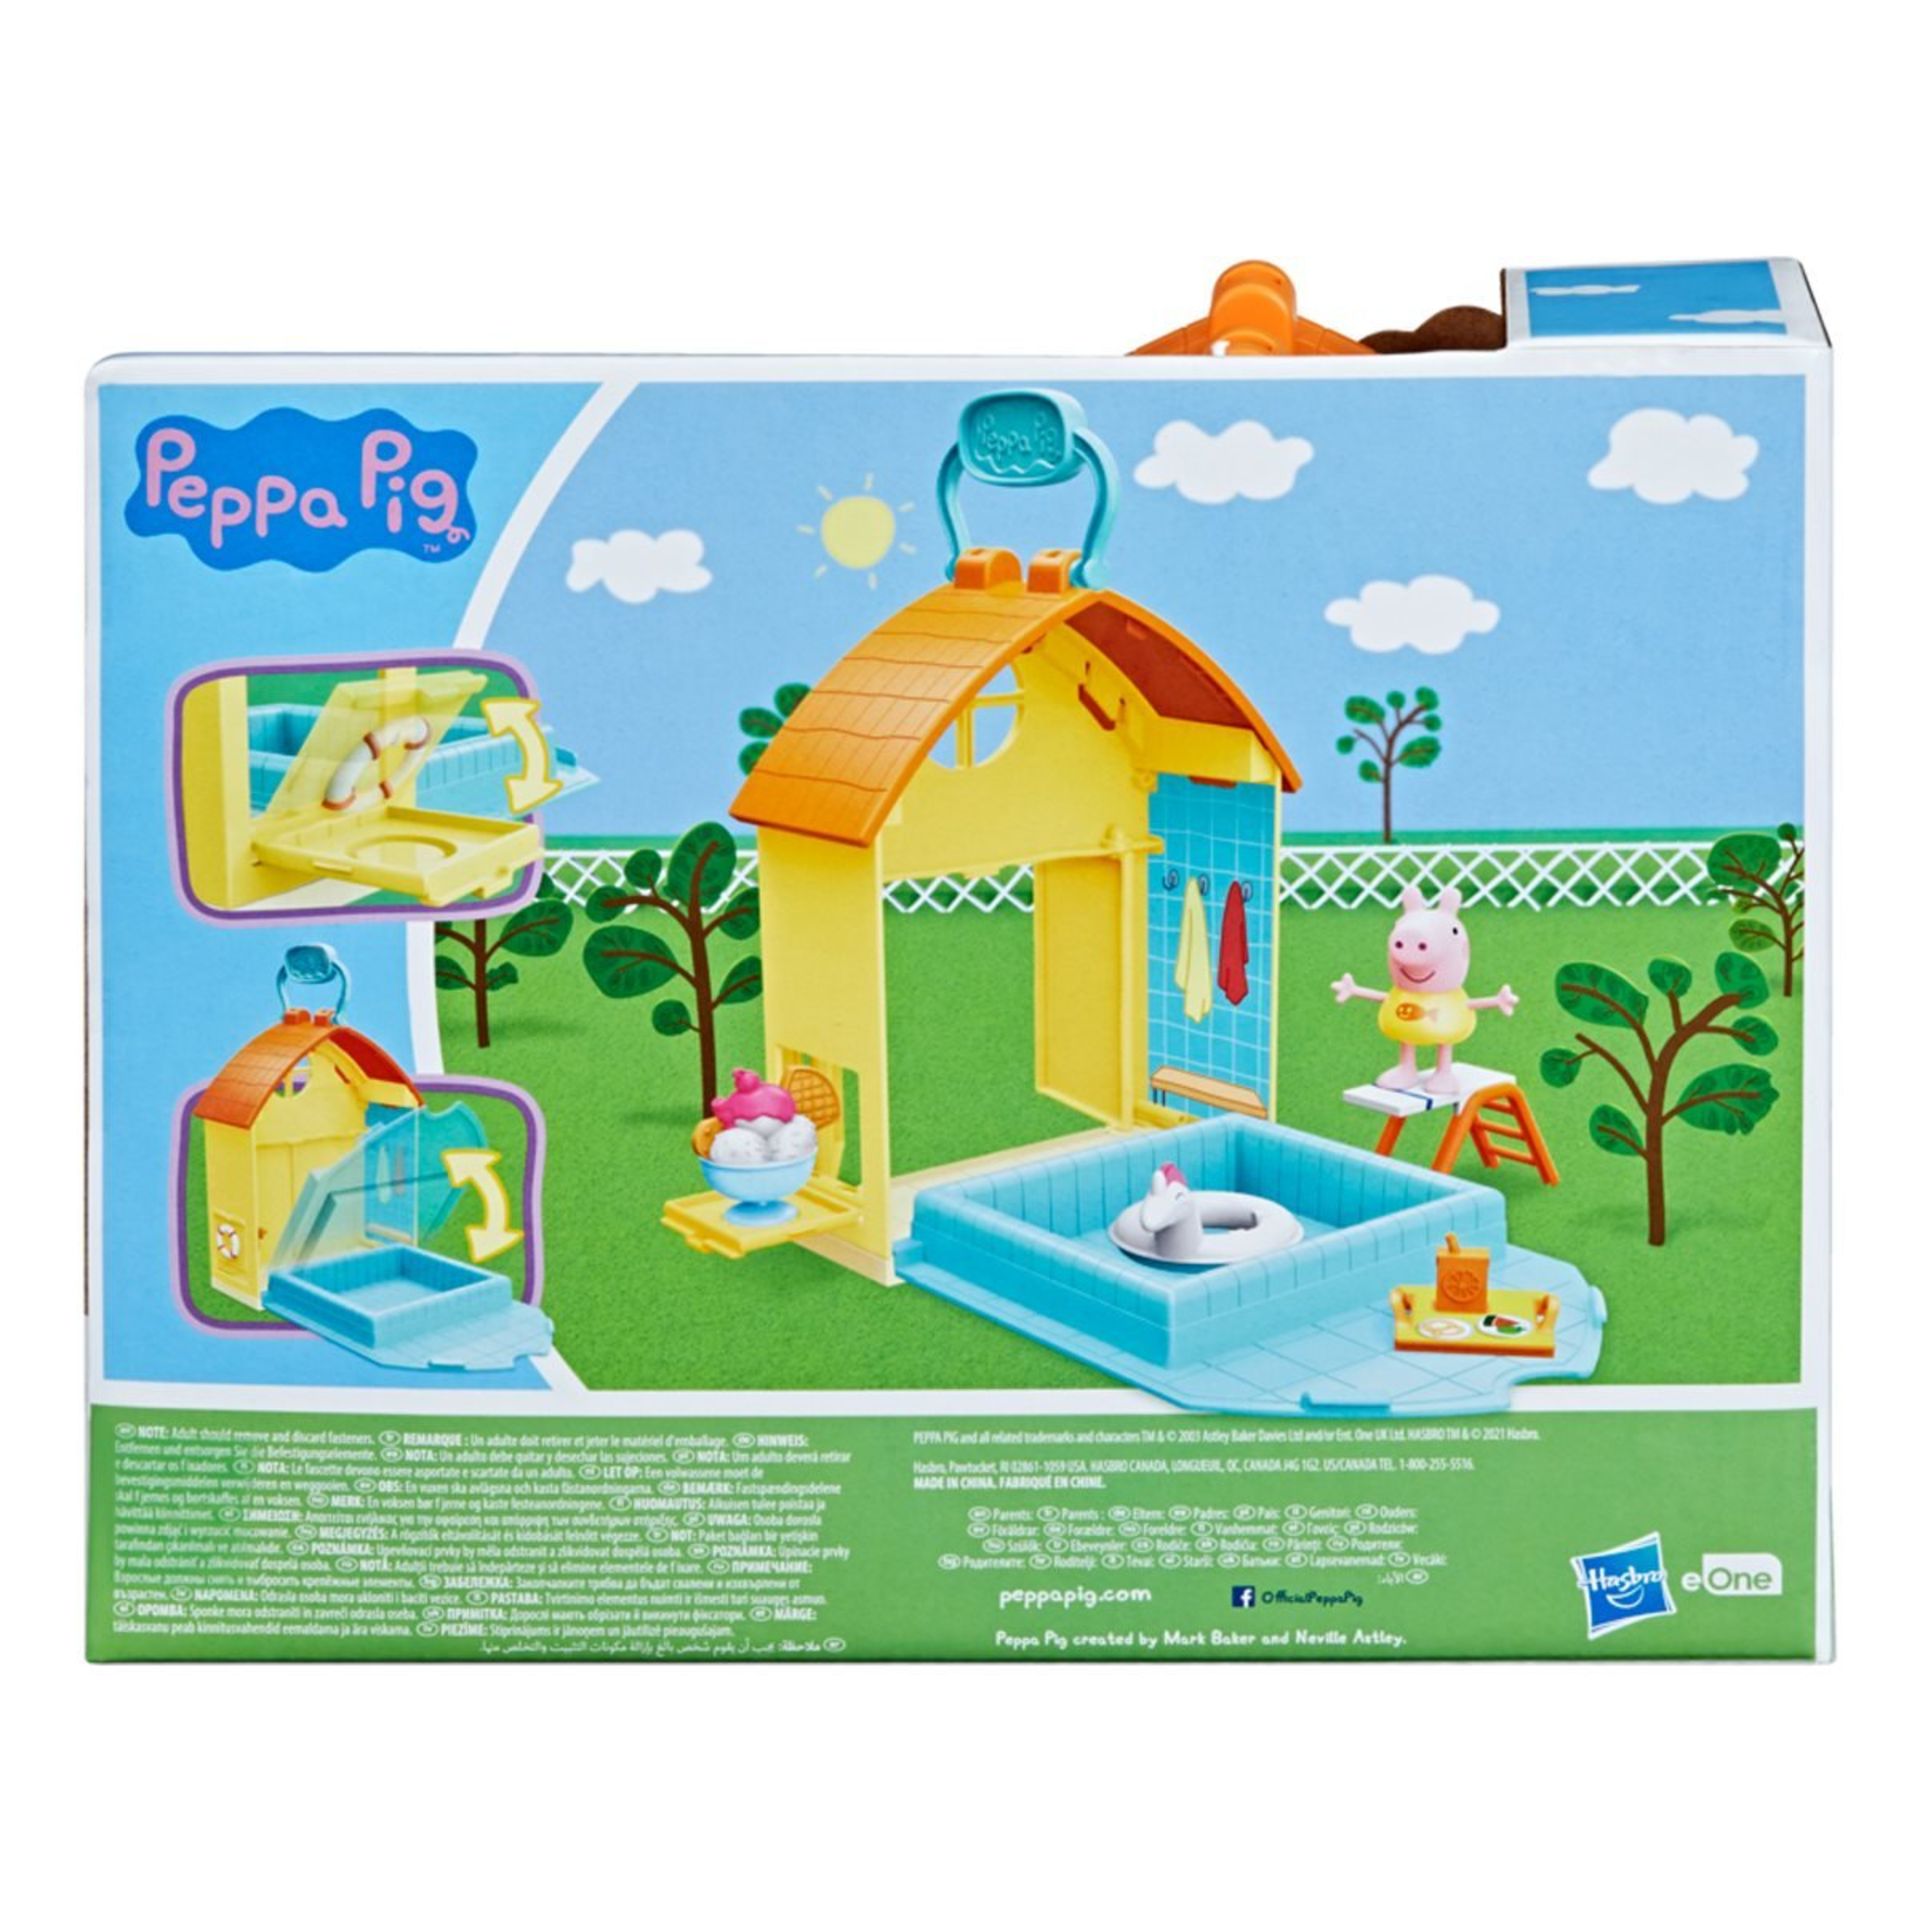 50X NEW PEPPAS SWIMMING POOL FUN - MAIL ORDER PACKAGING - Image 11 of 11